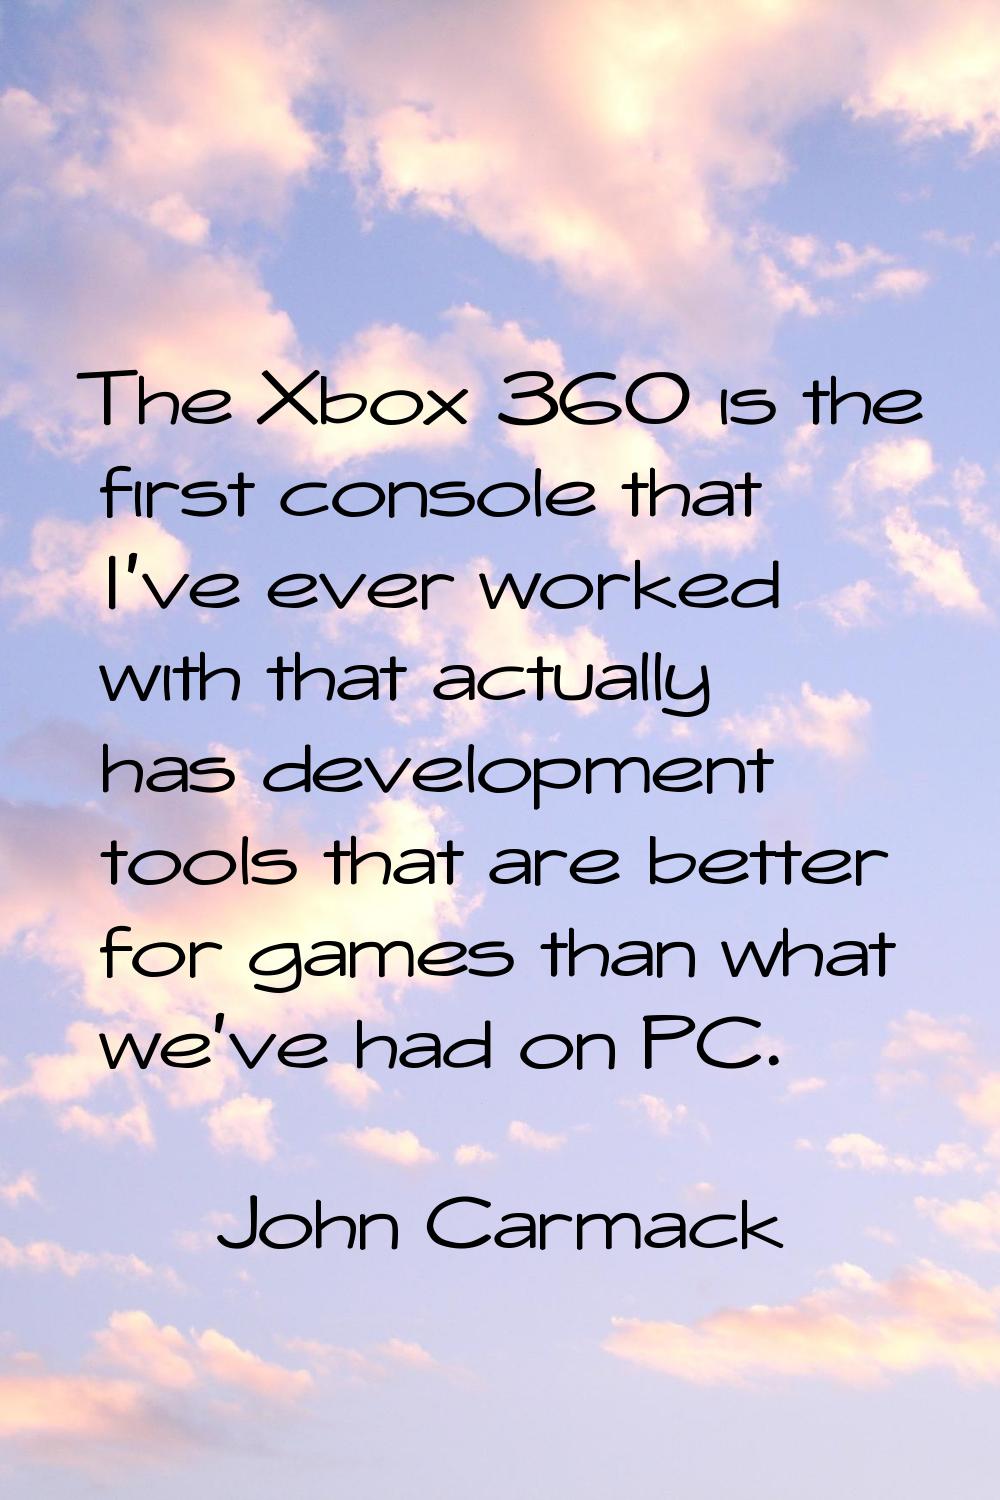 The Xbox 360 is the first console that I've ever worked with that actually has development tools th